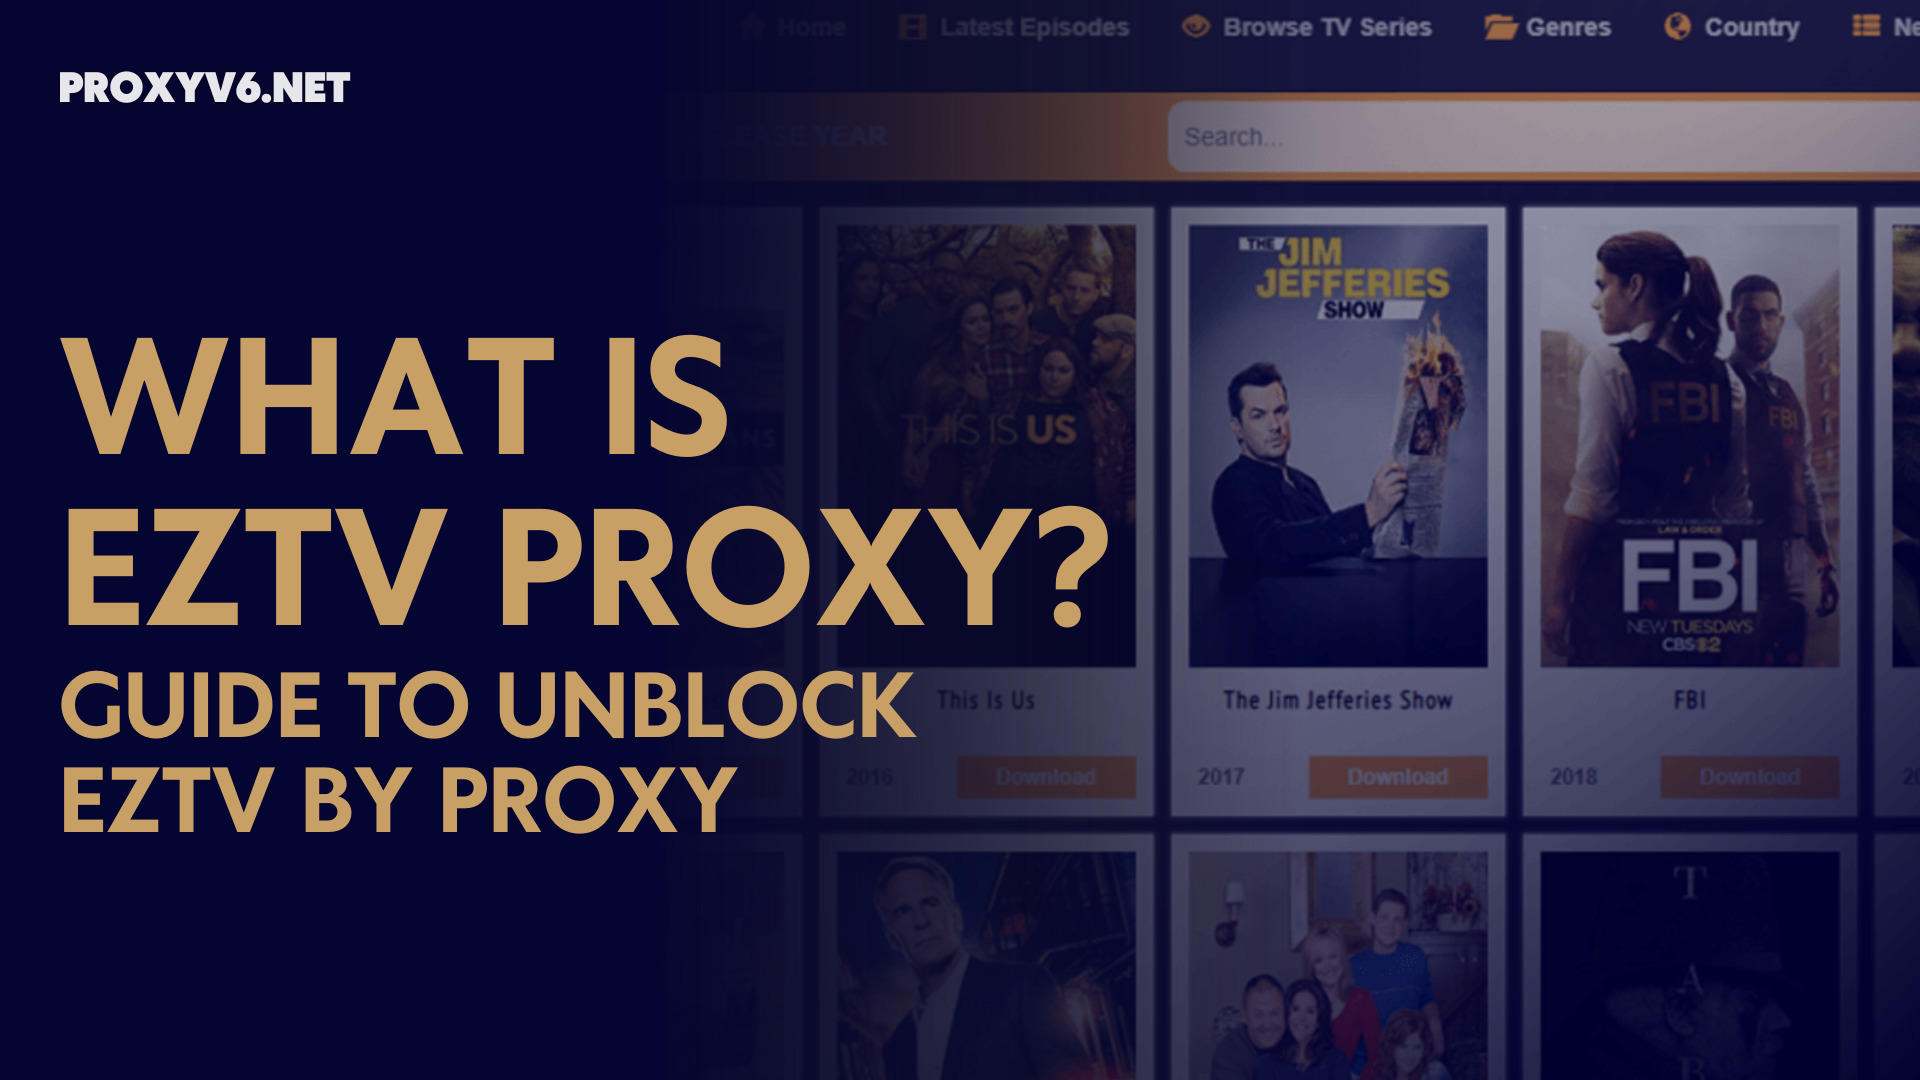 What is EZTV Proxy? Guide to unblock EZTV by Proxy